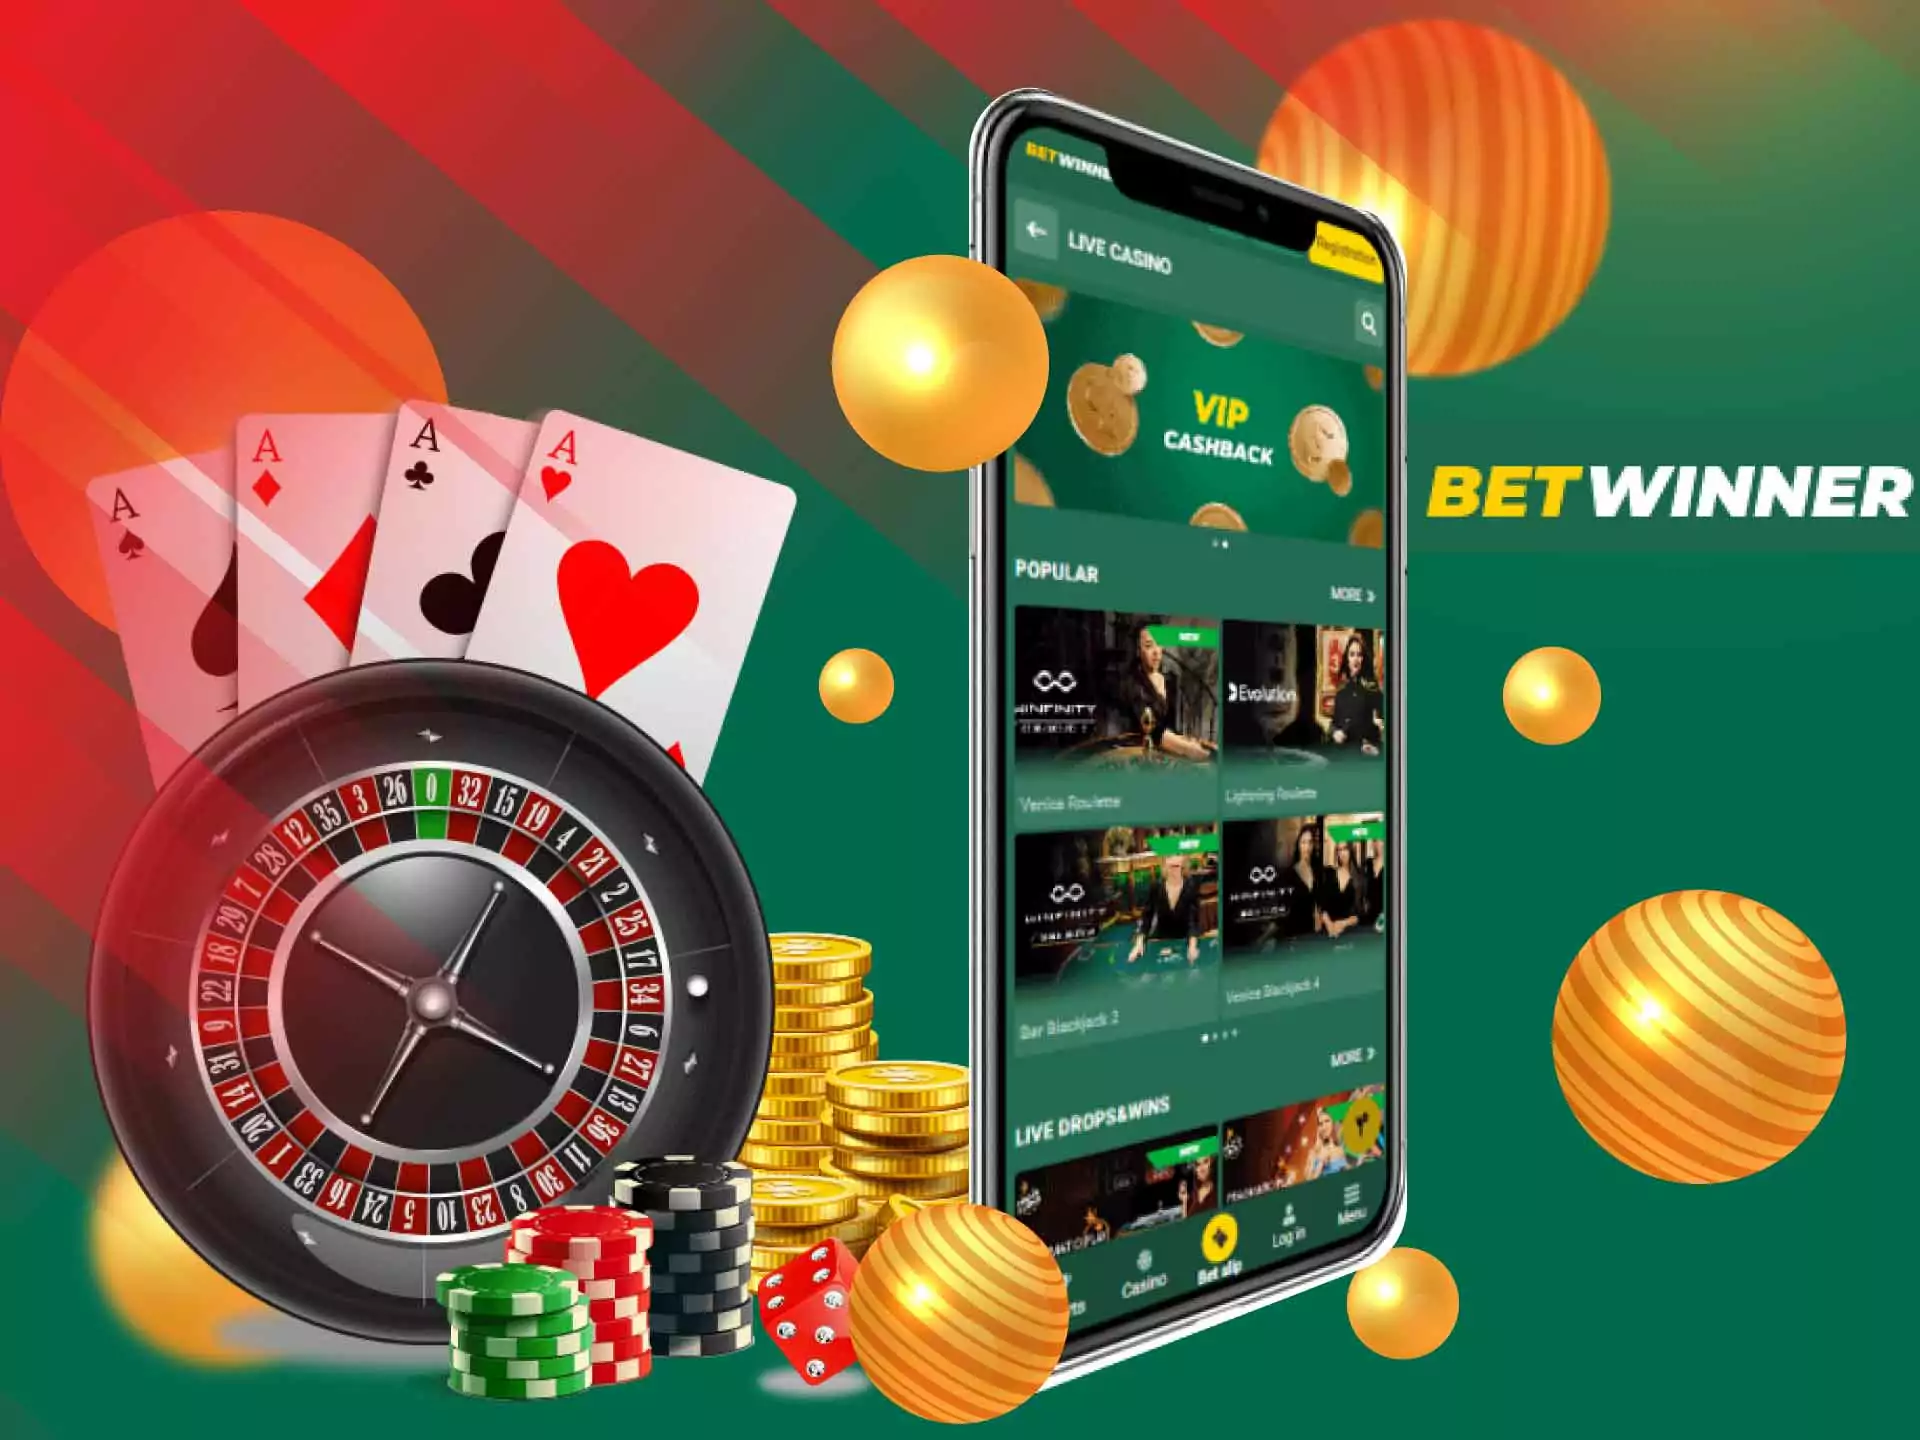 Another Betwinner entertainment is the online casino.